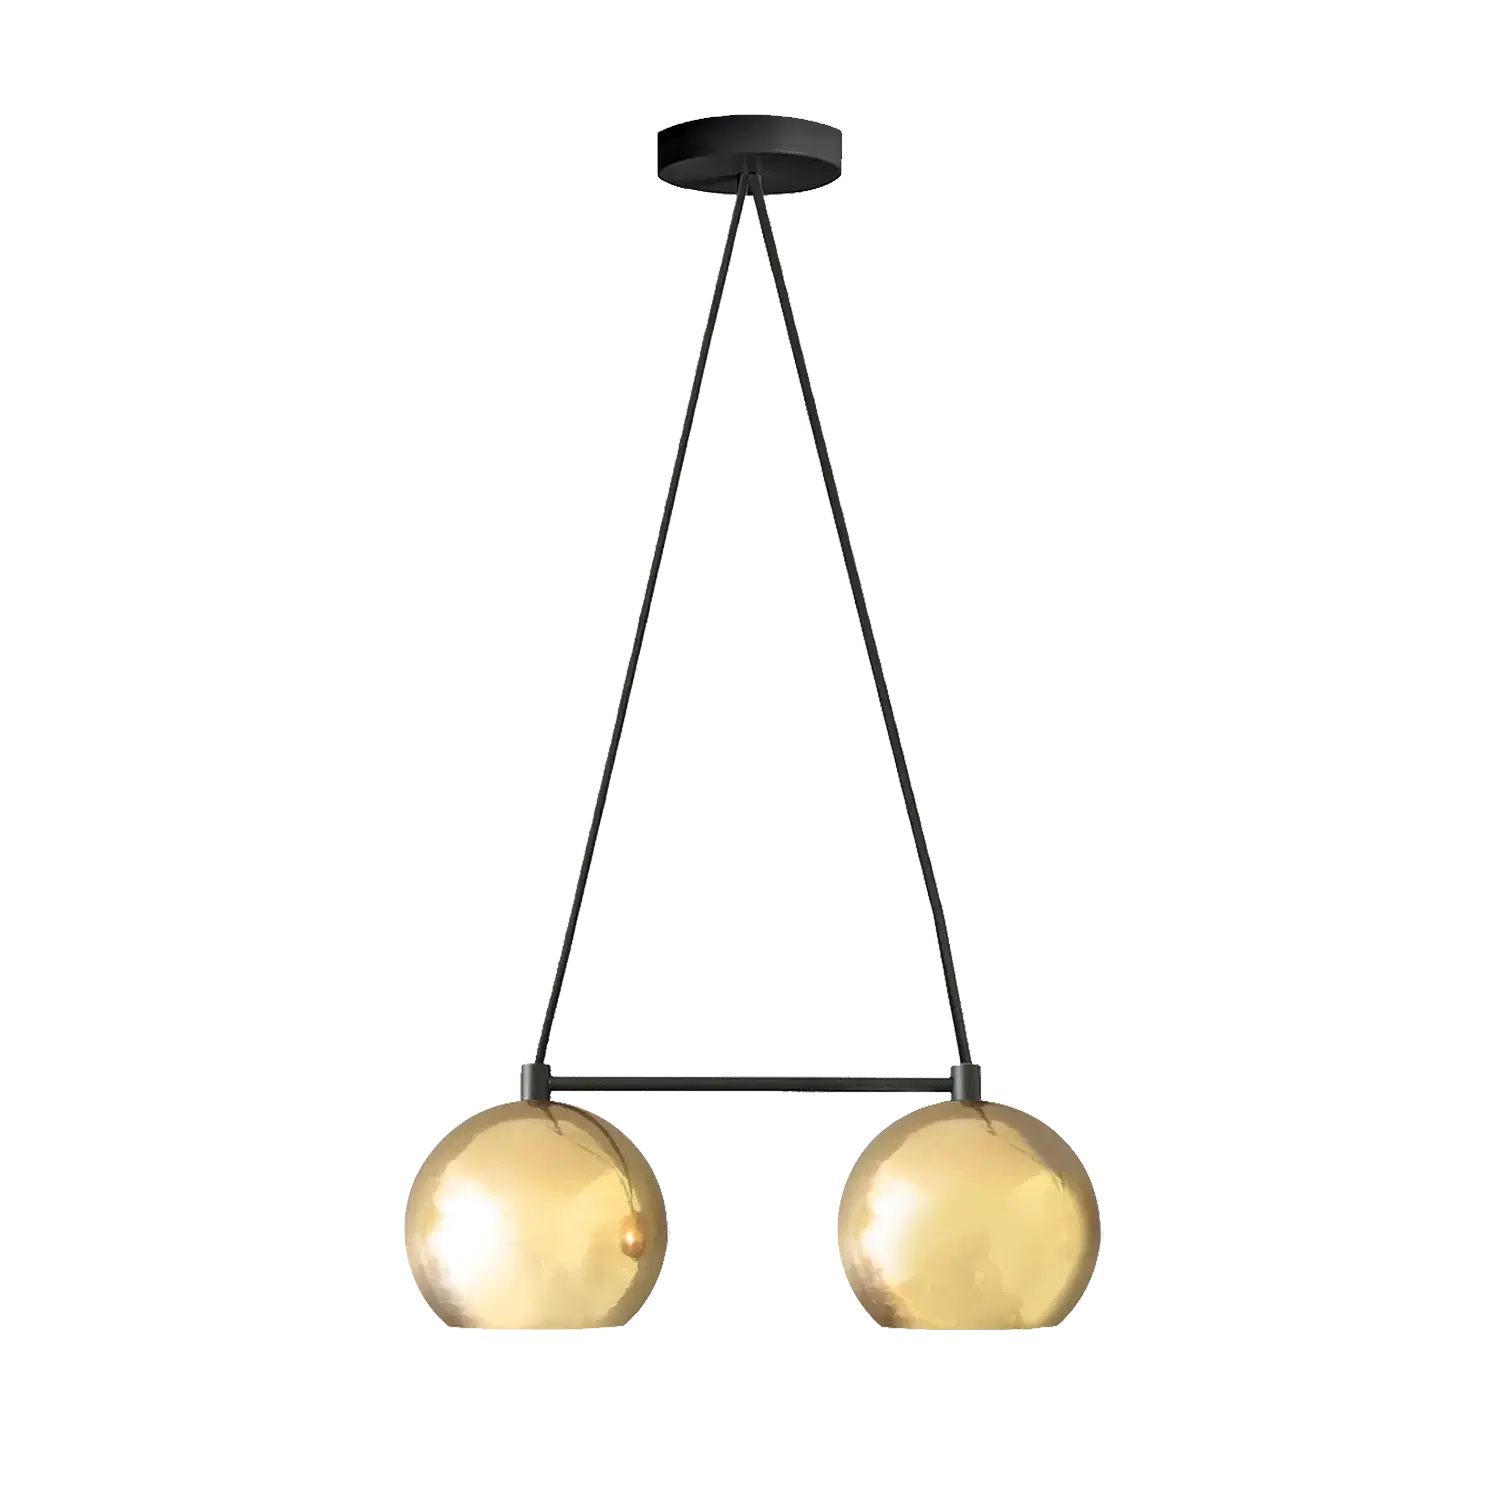 Dounia home chandelier in Polished brass  made of Metal, Model: Mishal